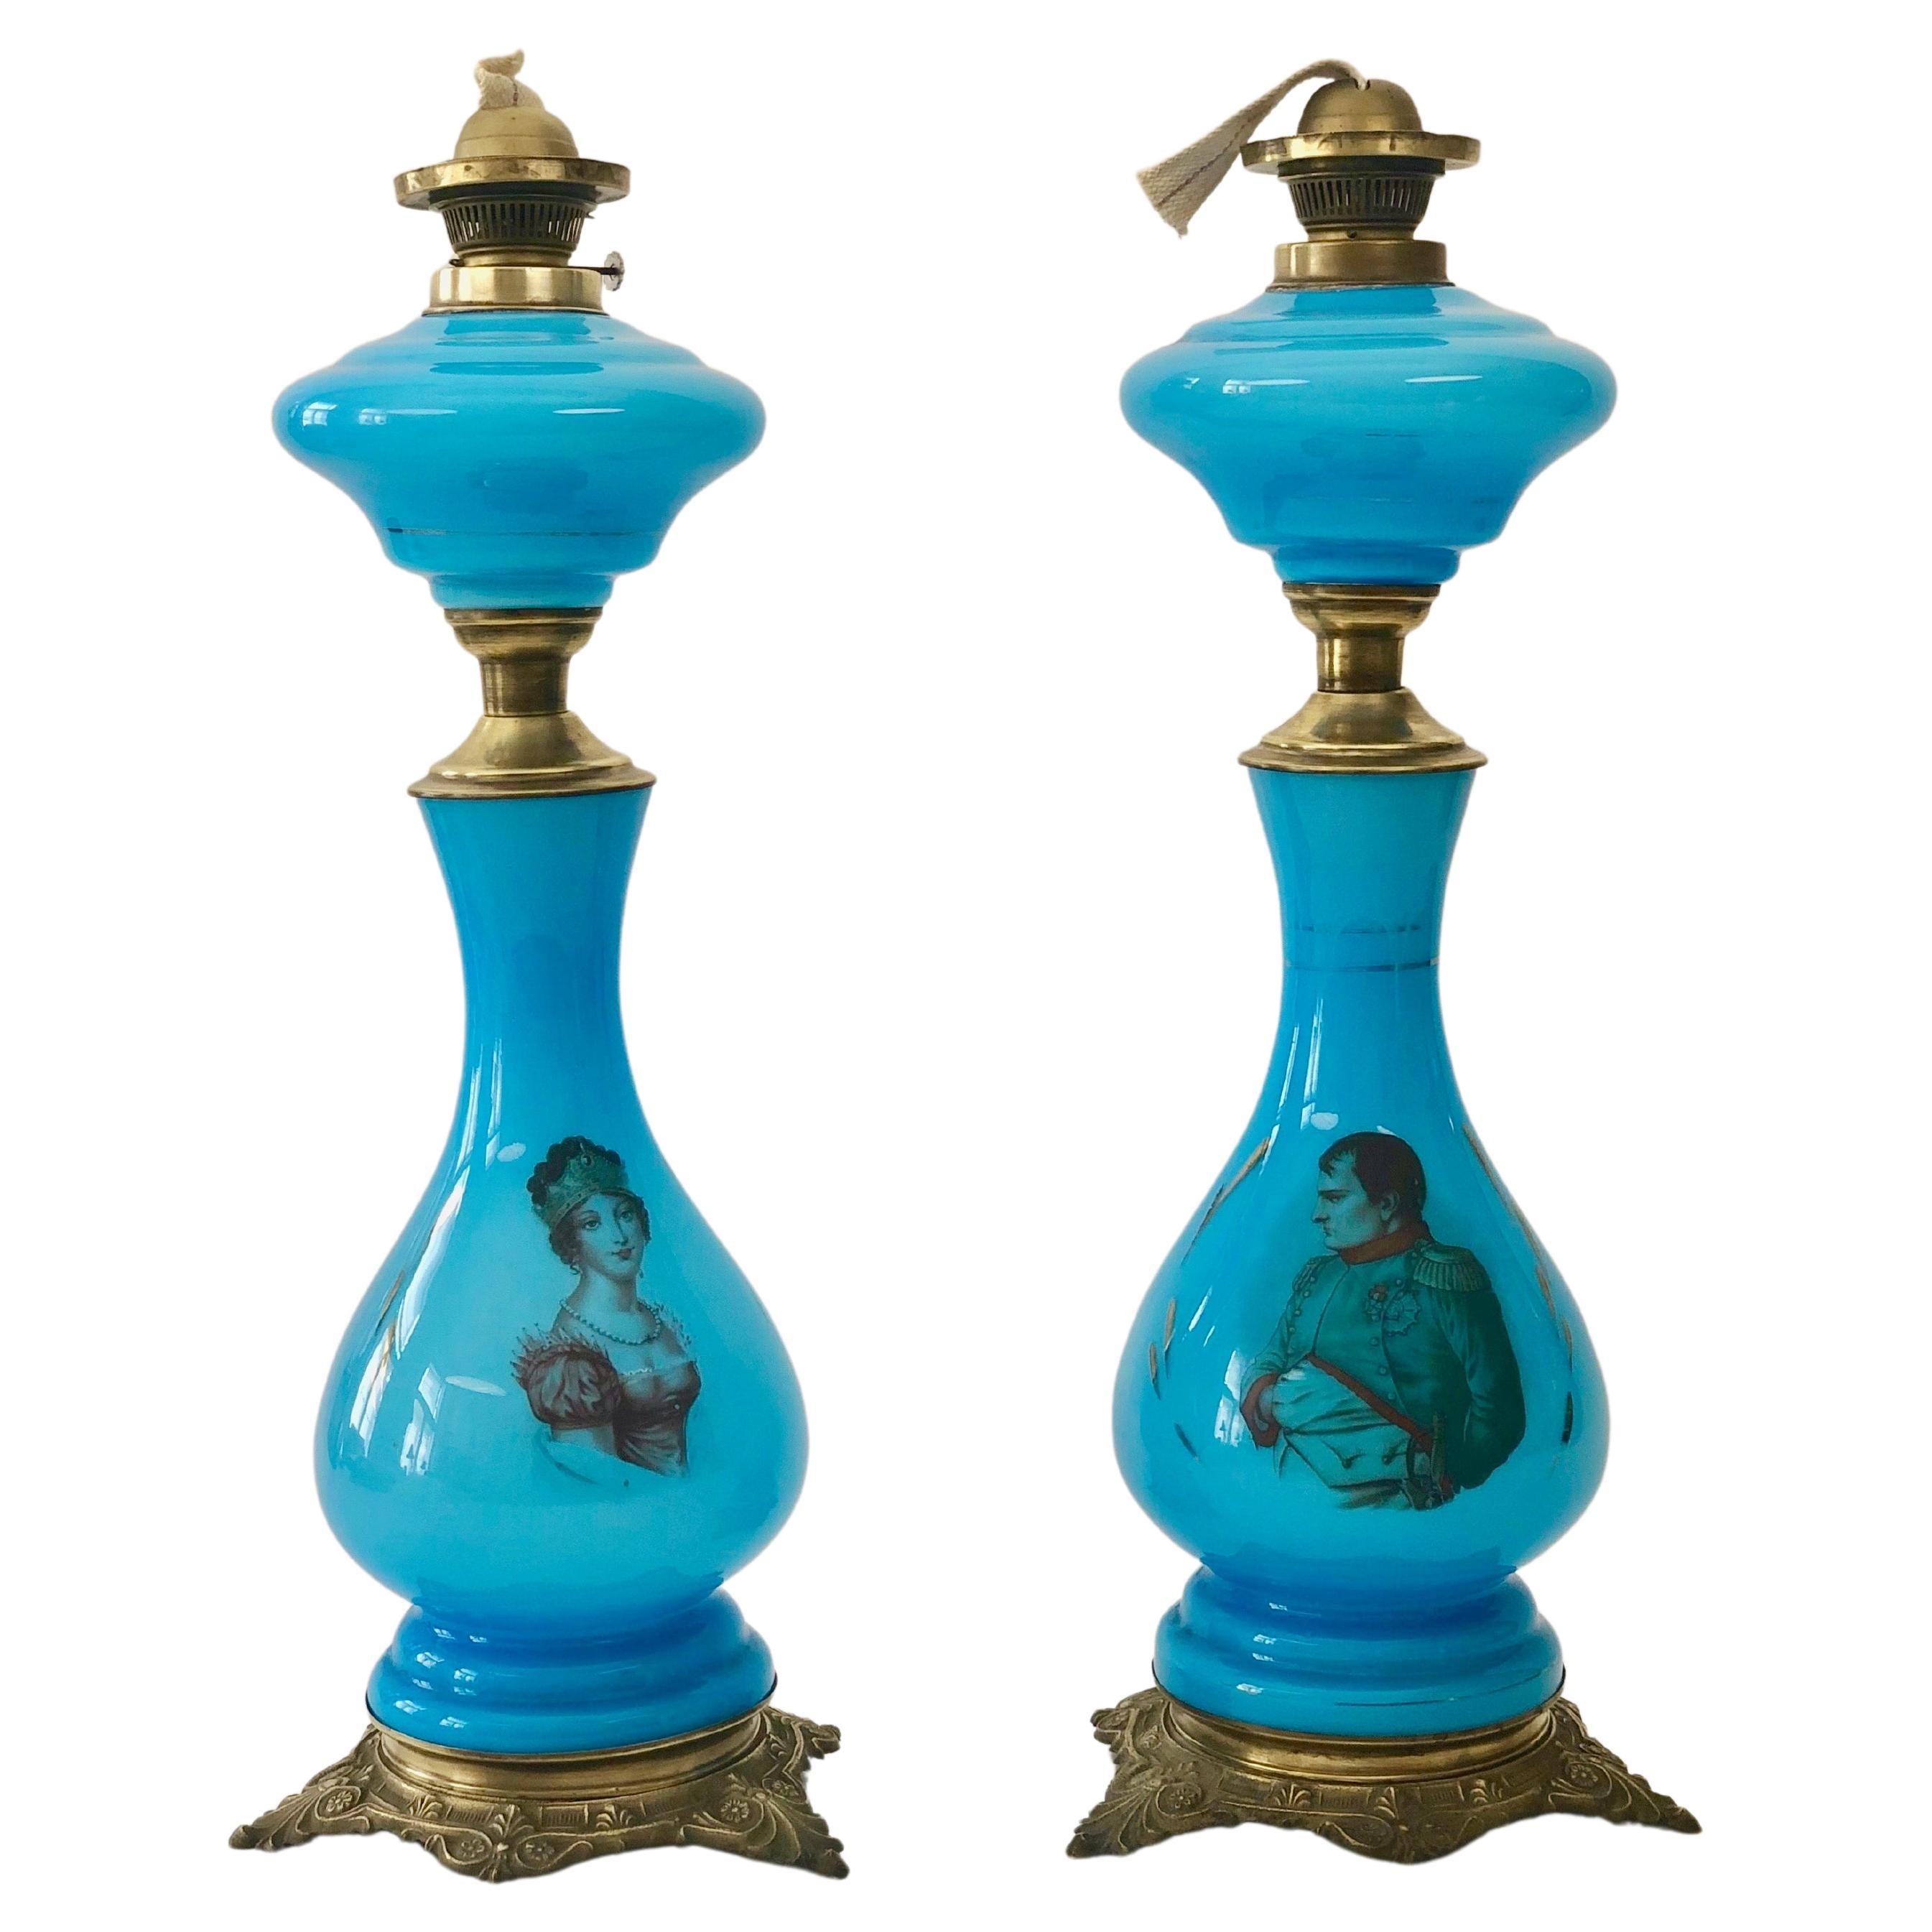 Pair of Antique Opaline Glass Oil Lamps, Depicting Napoleon and Josephine, 1890